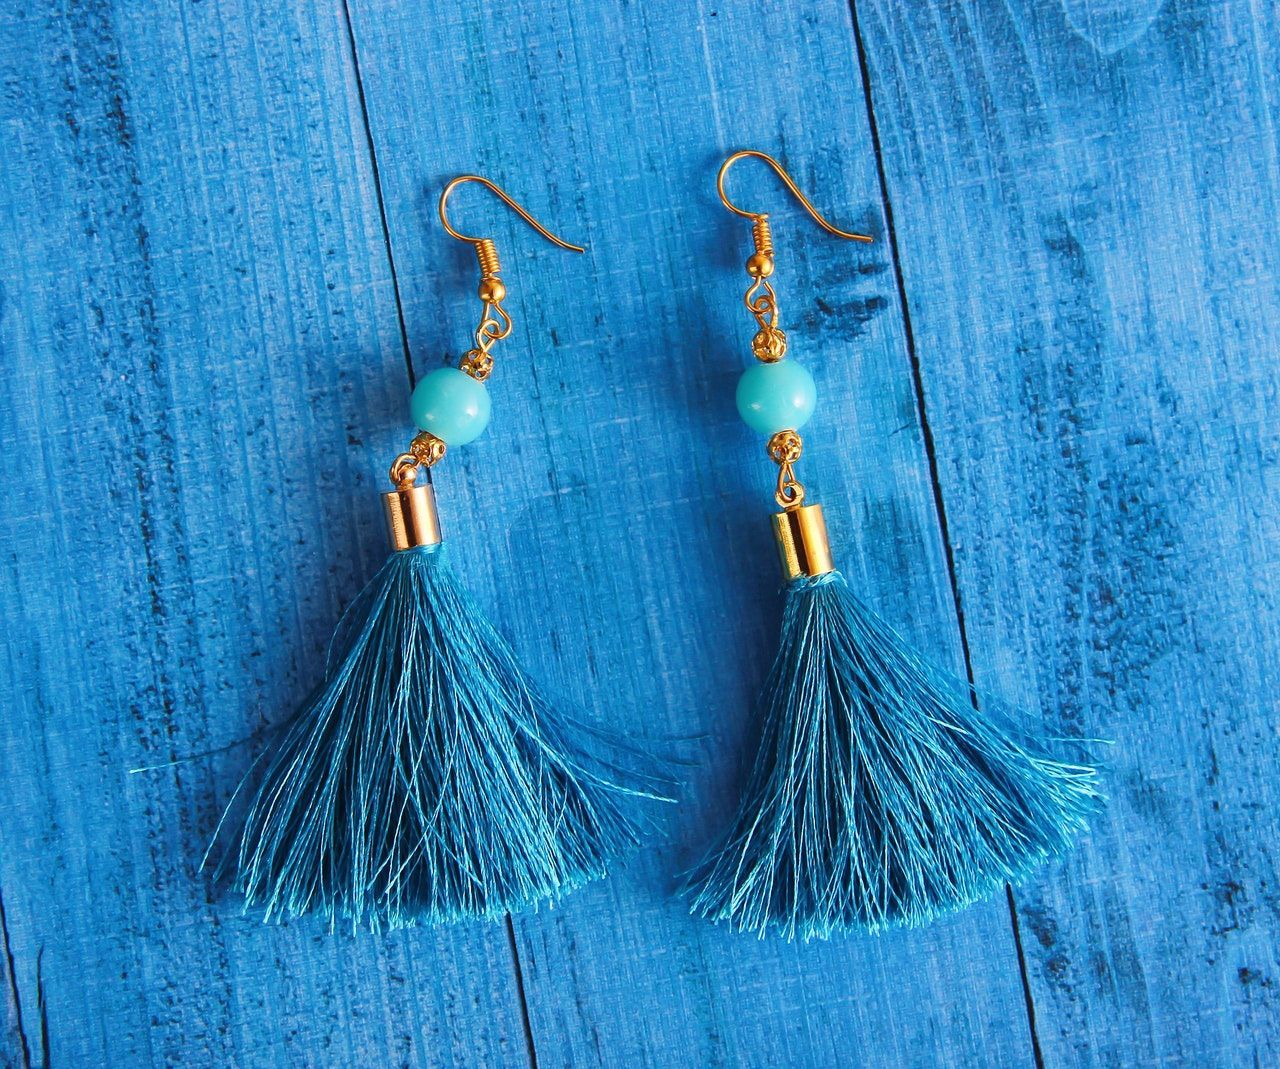 14k gold dangly earrings with a light blue bead and dark blue tassels on a blue piece of wood